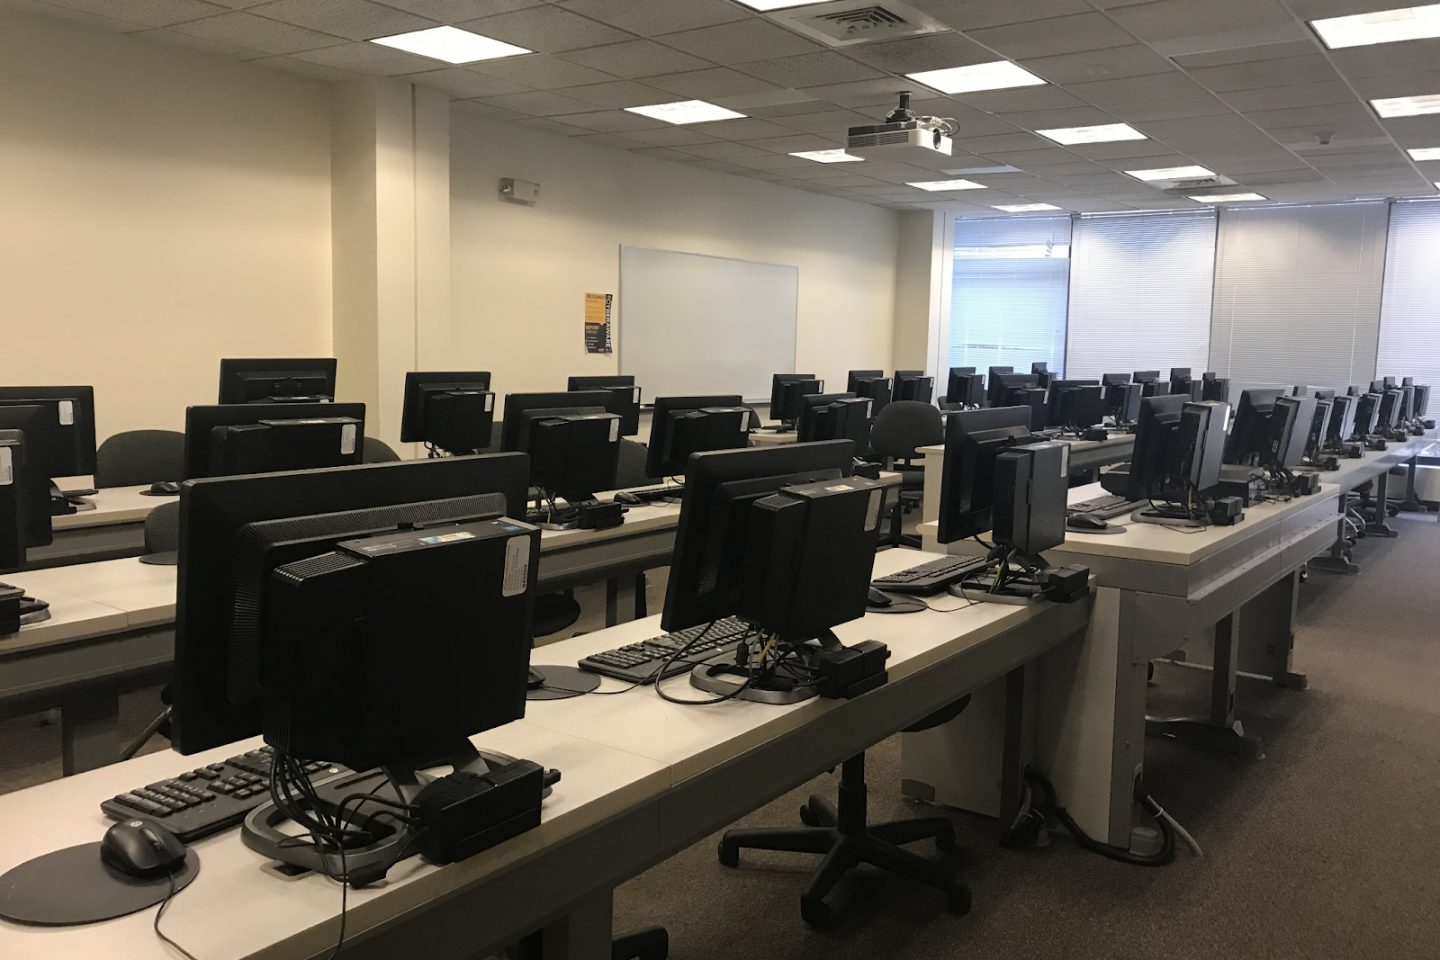 Rows of computers and technical equipment